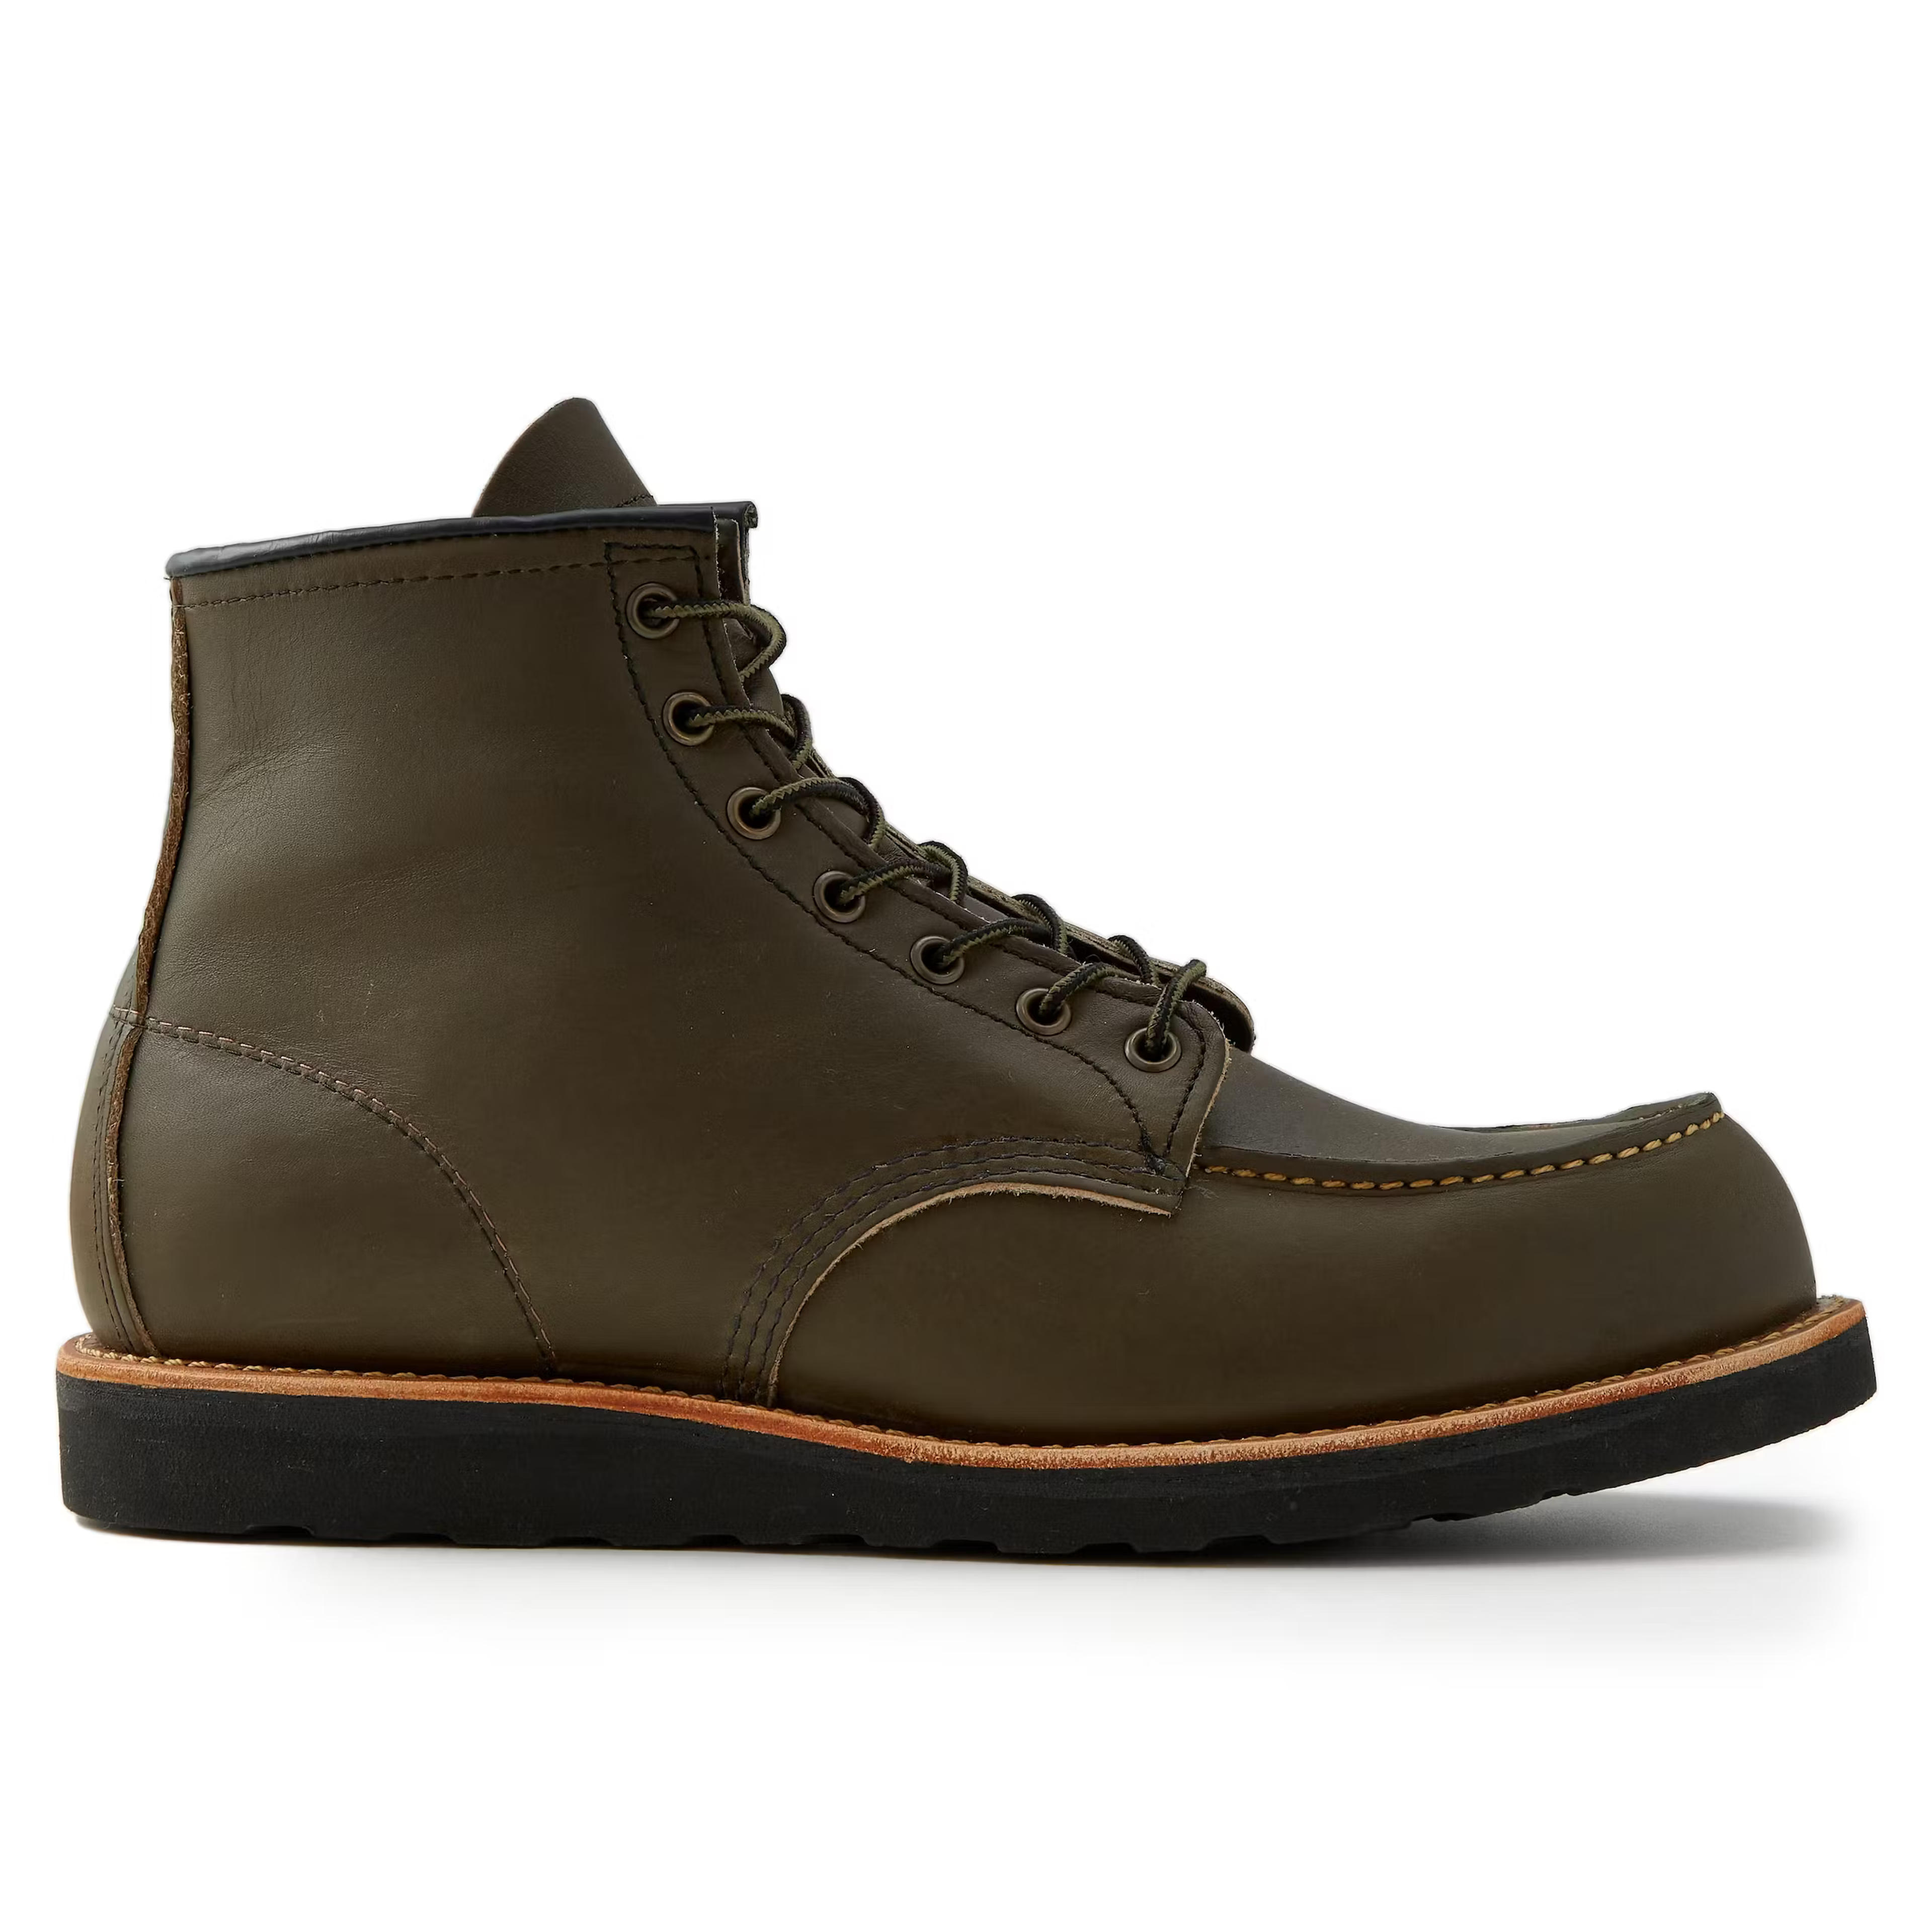 Red Wing Heritage 6-Inch Classic Moc Toe Boot - Alpine Portage | Work Boots | Huckberry